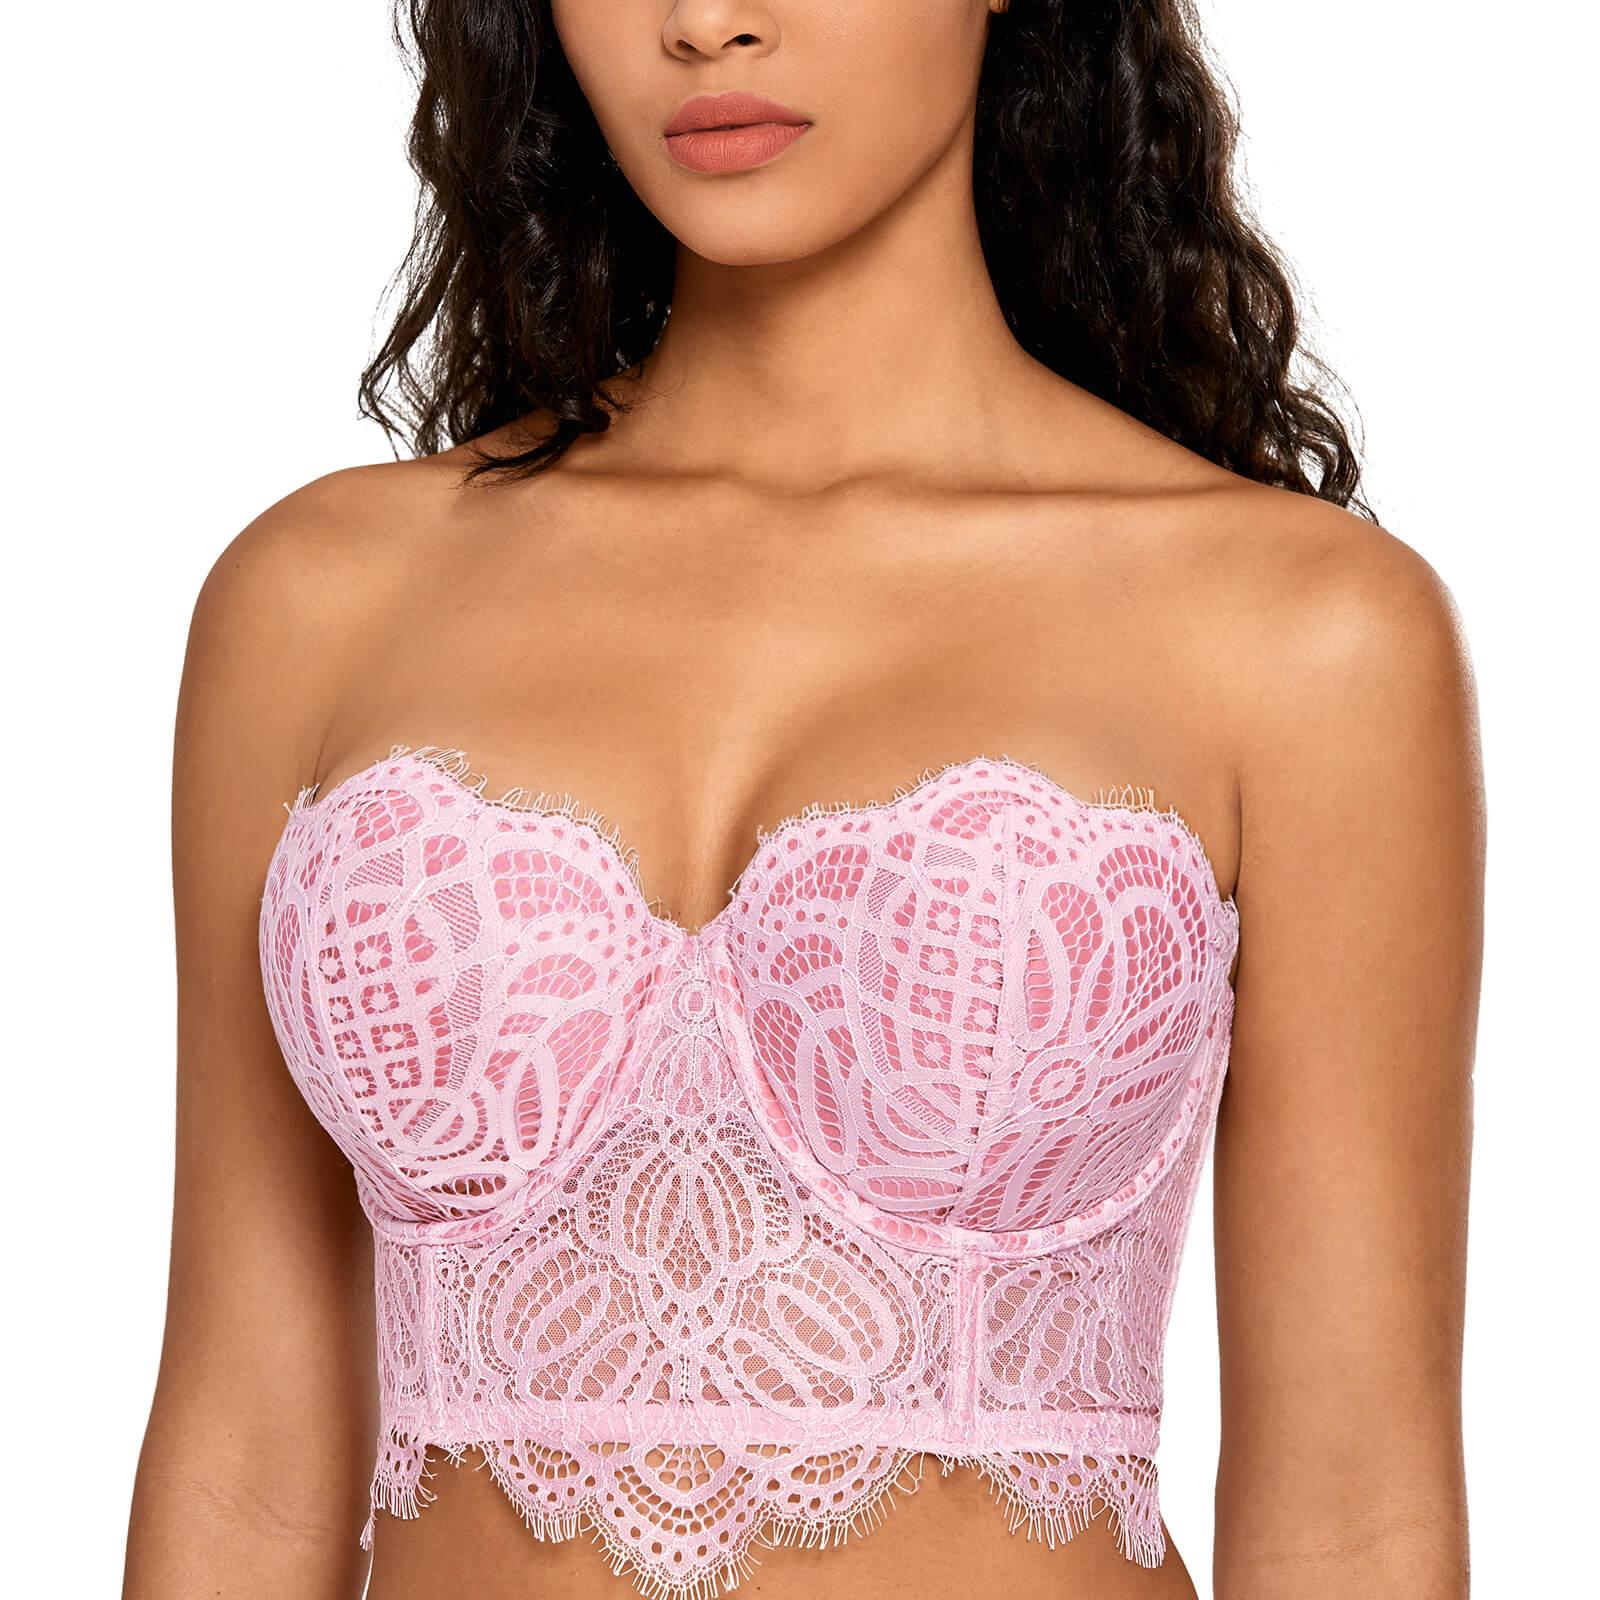 Push Up Strapless Bra For Heavy Breast